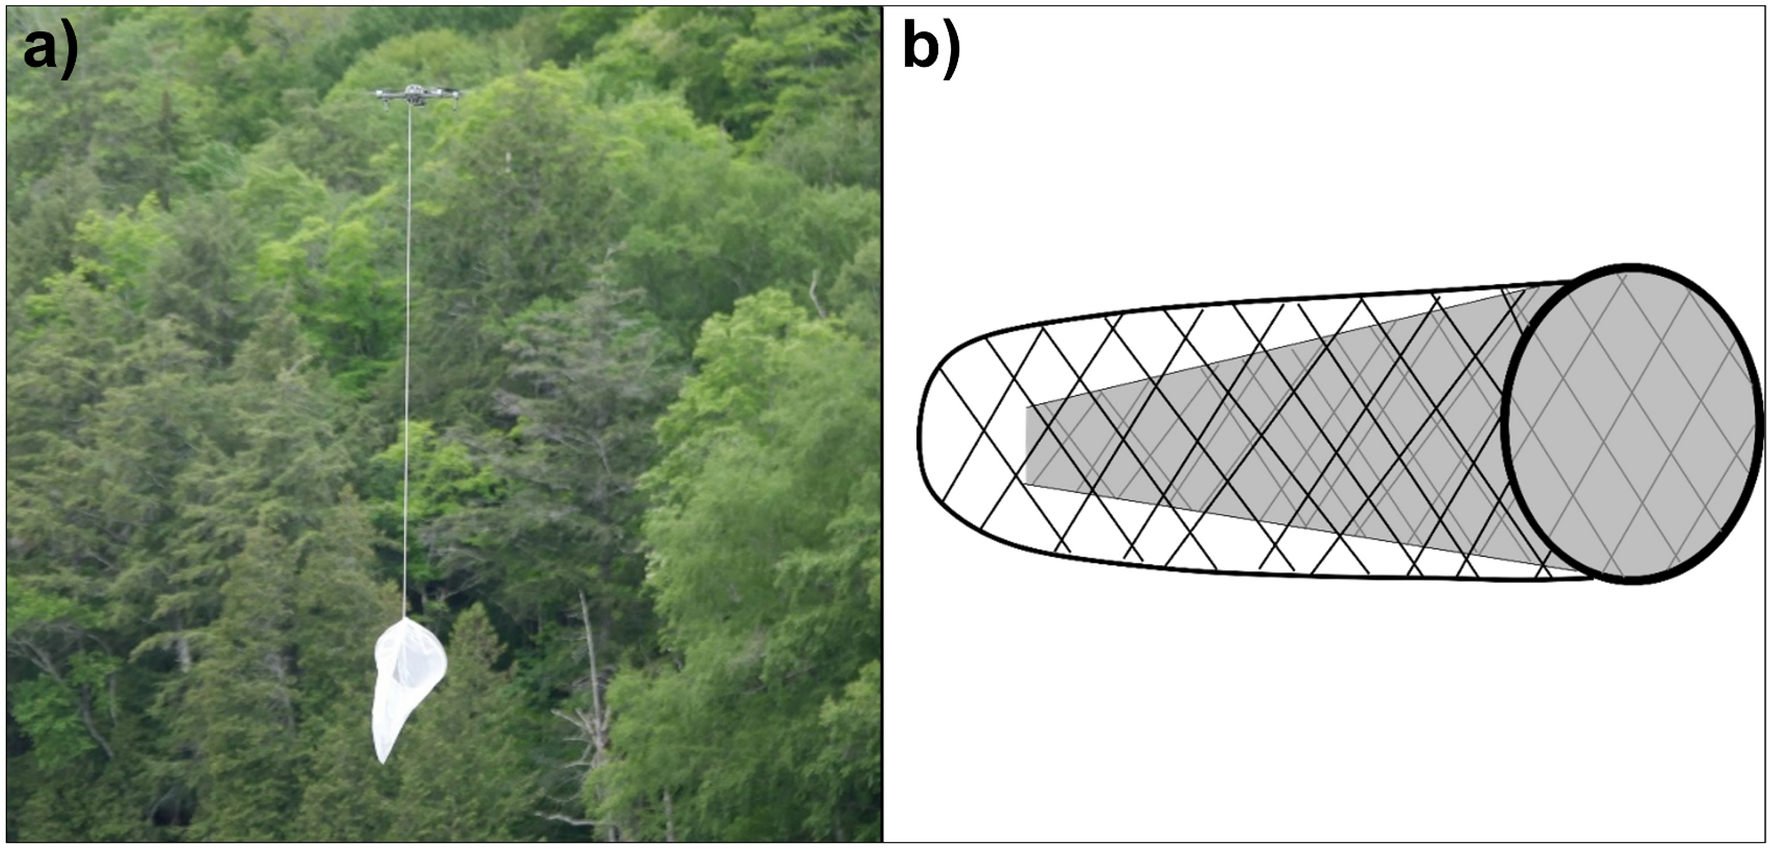 Optimal settings and advantages of drones as a tool for canopy arthropod  collection